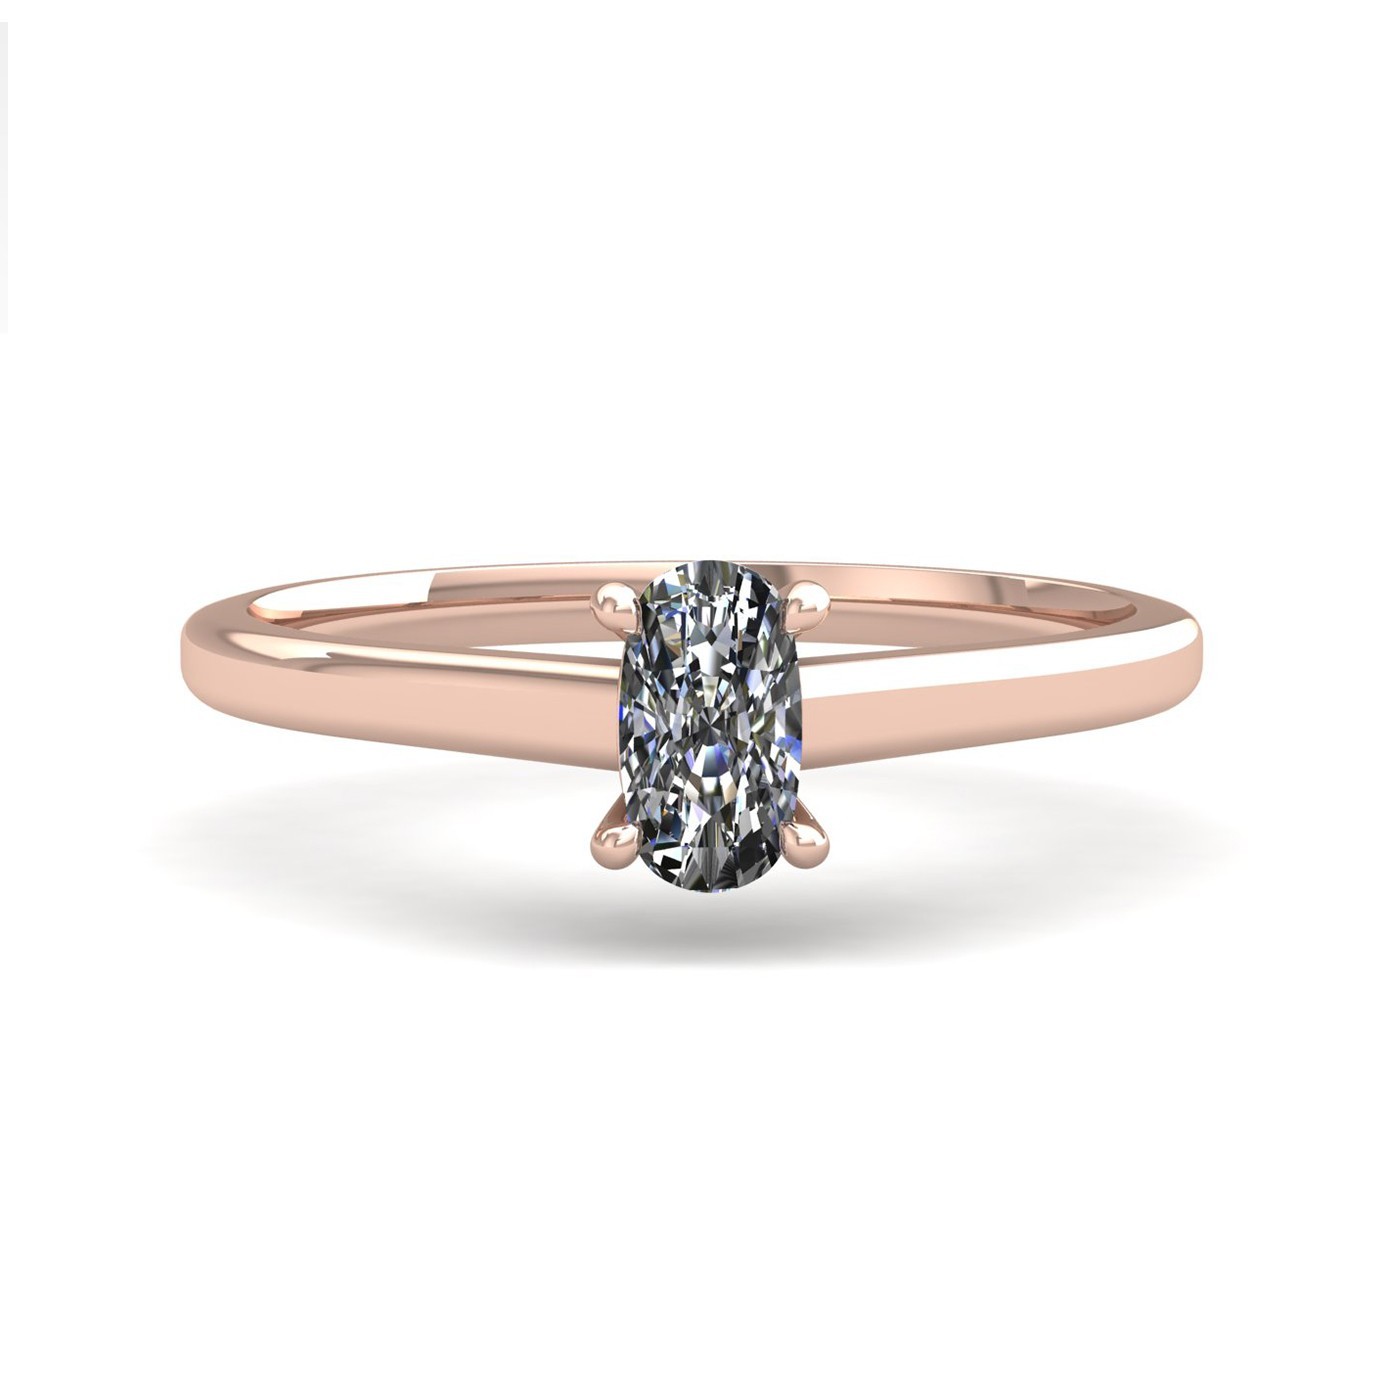 18k rose gold  0,50 ct 4 prongs solitaire elongated cushion cut diamond engagement ring with whisper thin band Photos & images